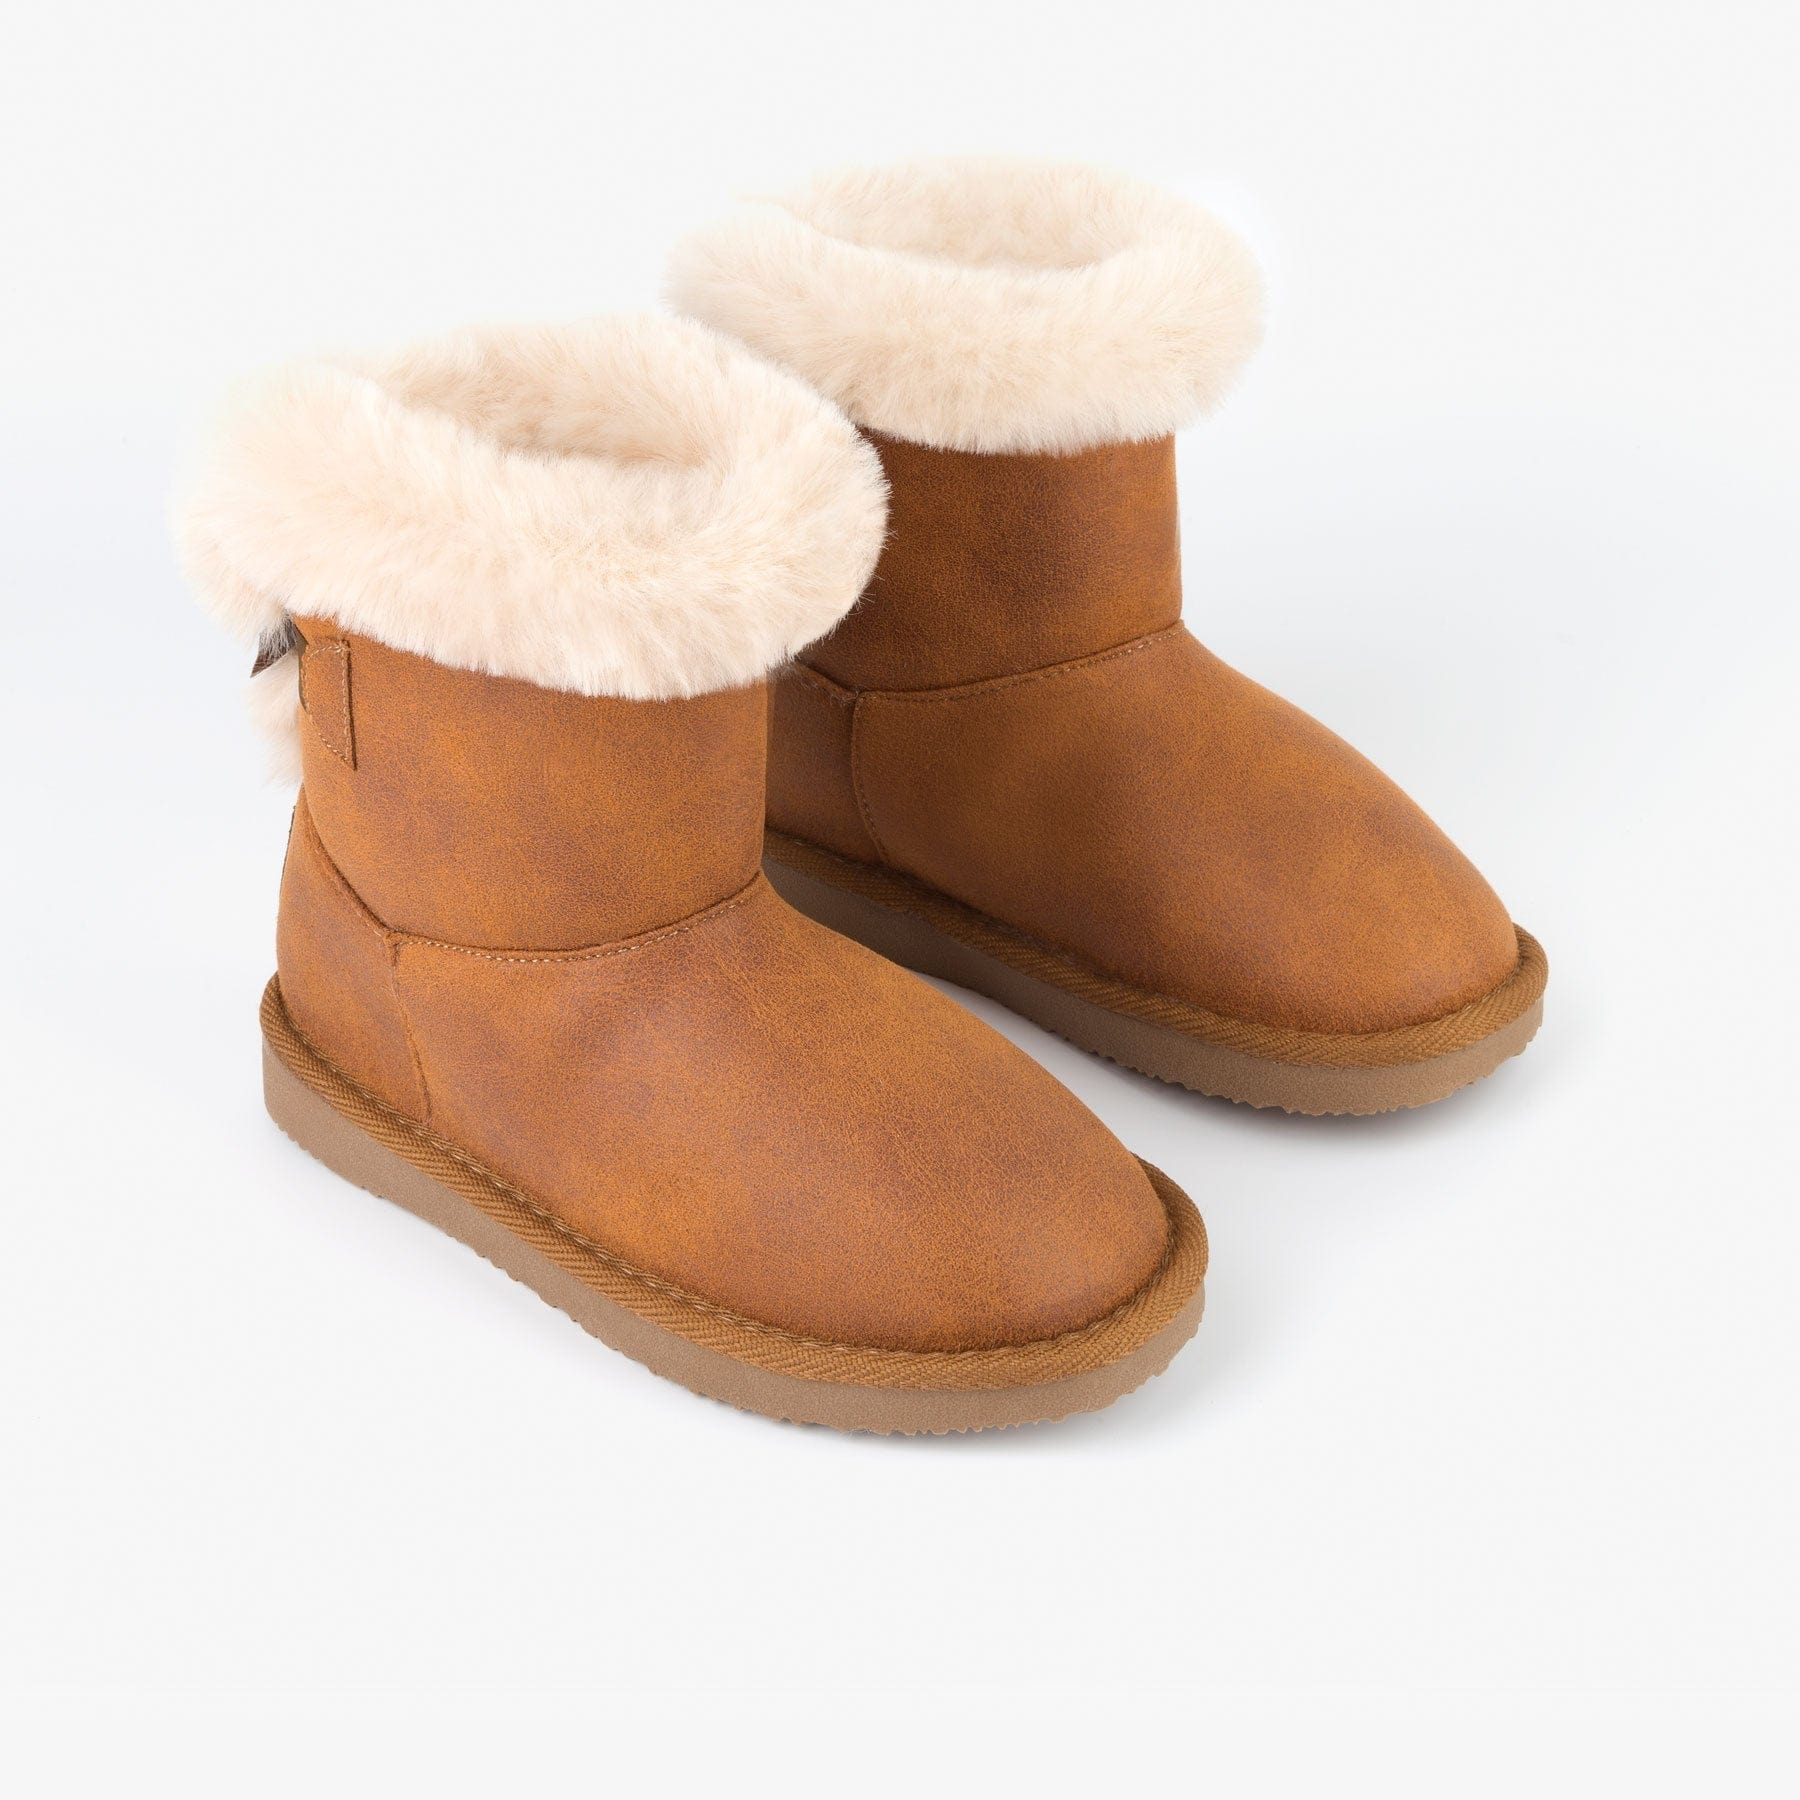 FRESAS CON NATA Shoes Camel Australian Boots with Bow